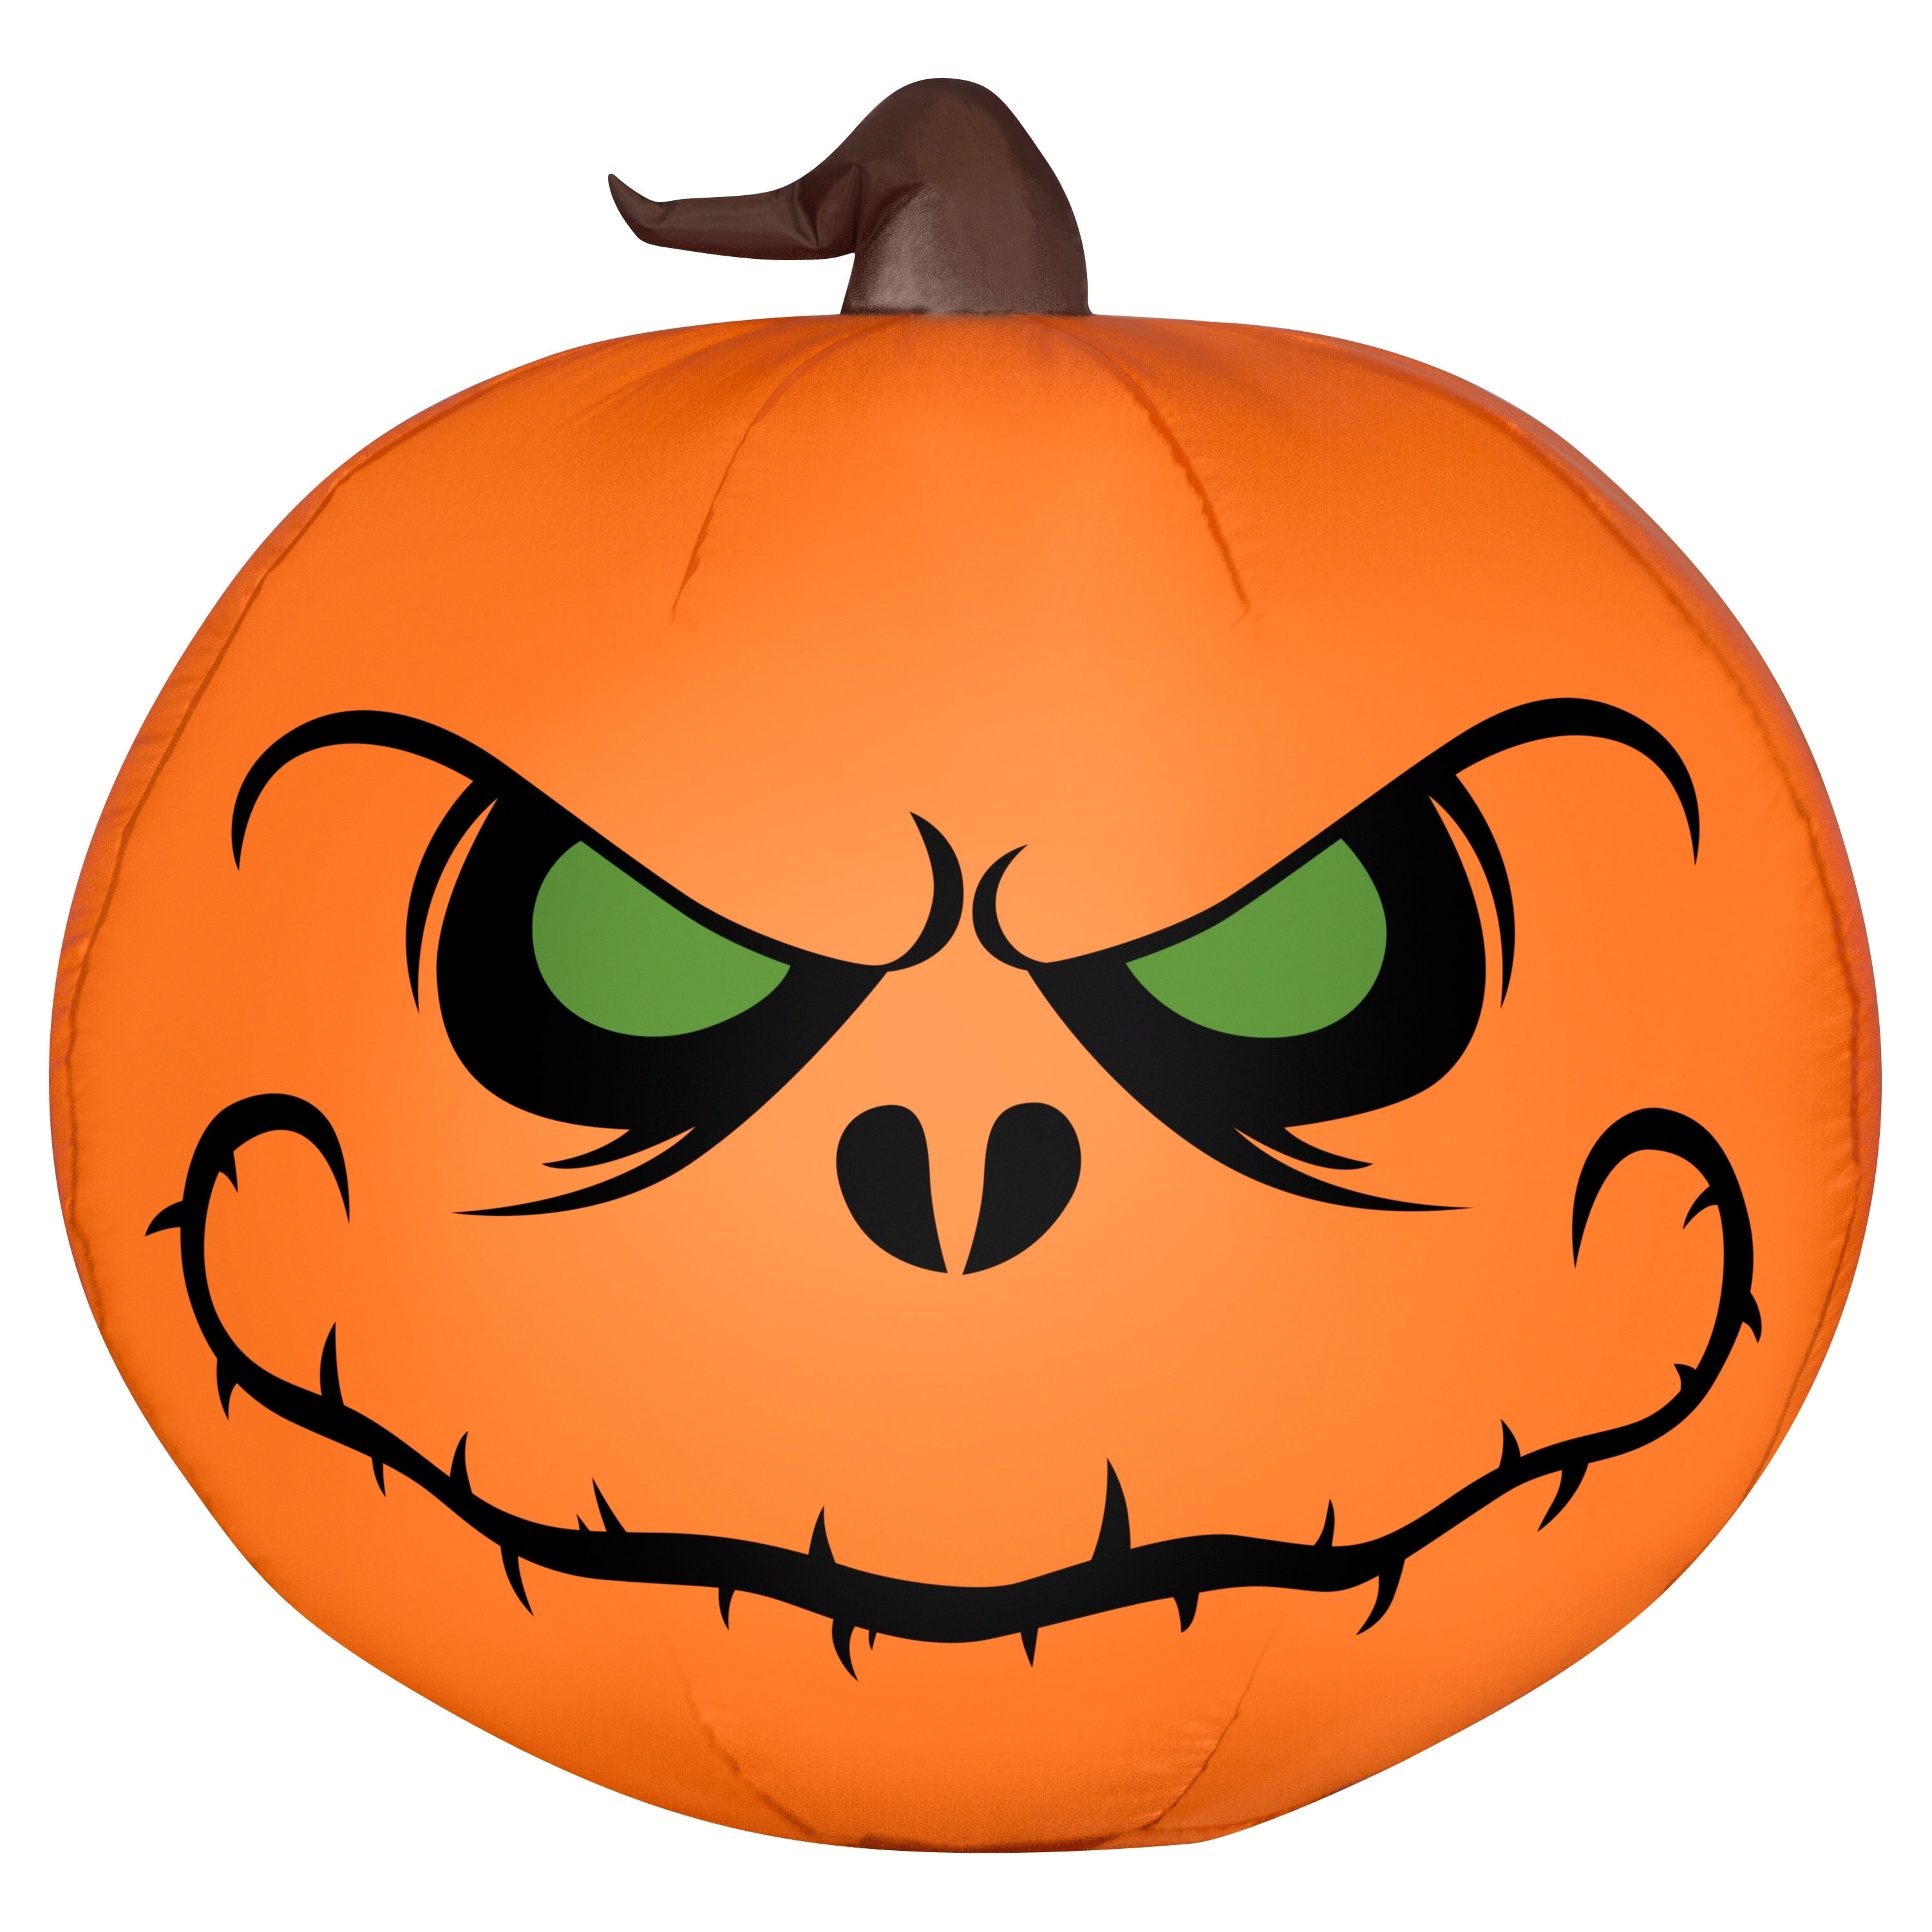 Airblown Inflatables Ghoulish Pumpkin, 3'